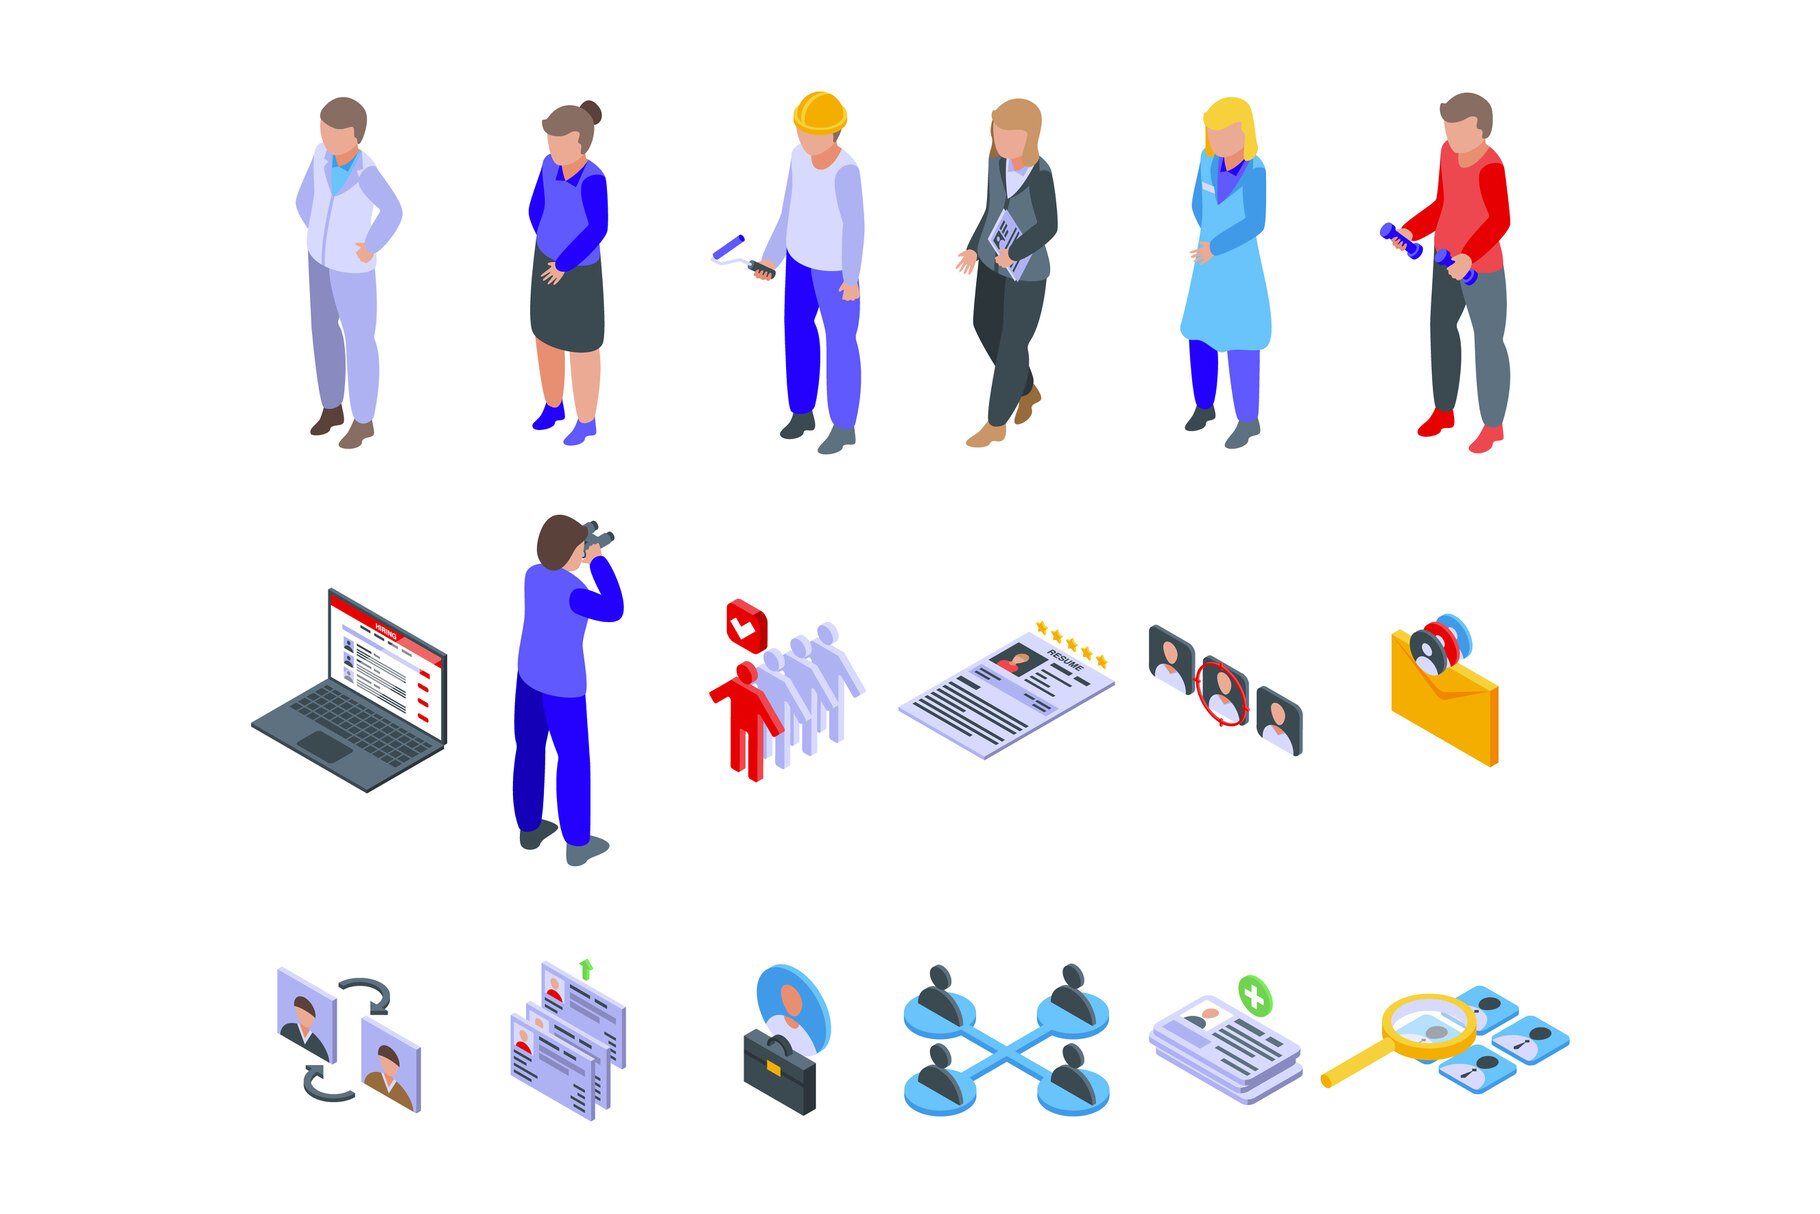 Human resources icons set, isometric cover image.